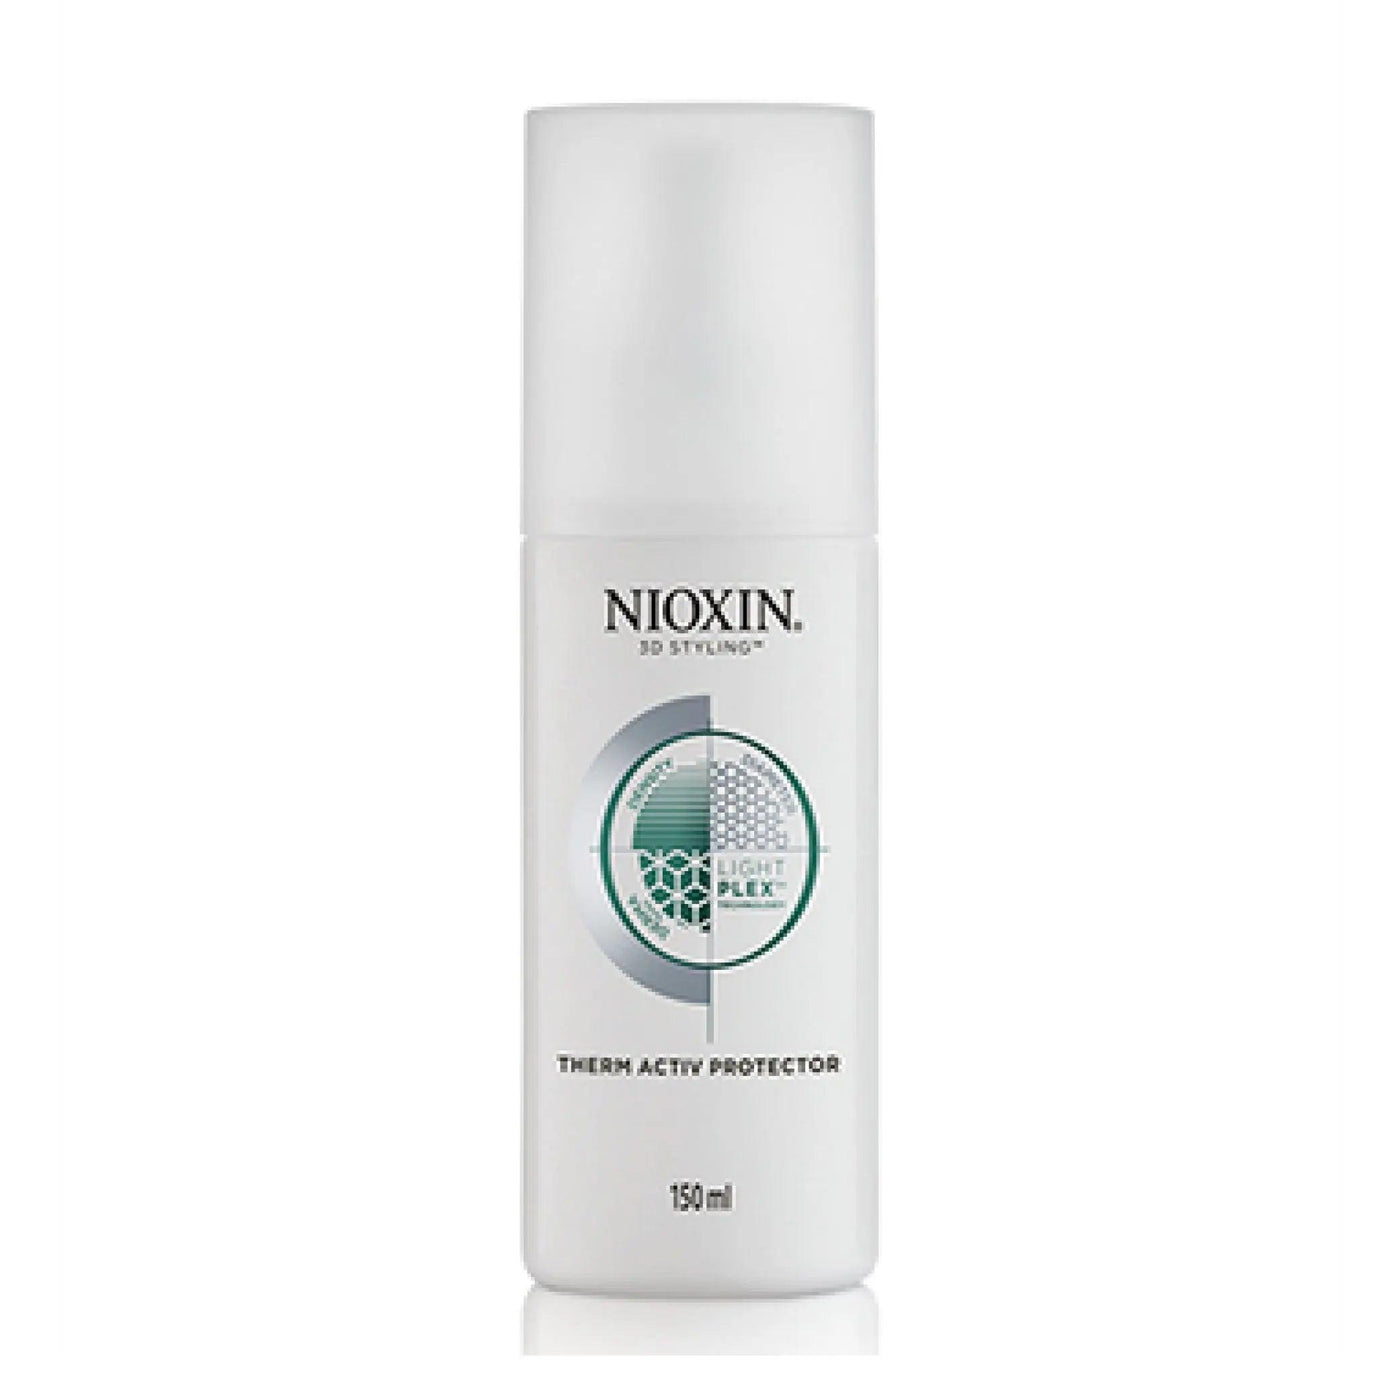 Therm Activ Protector Nioxin Boutique Deauville